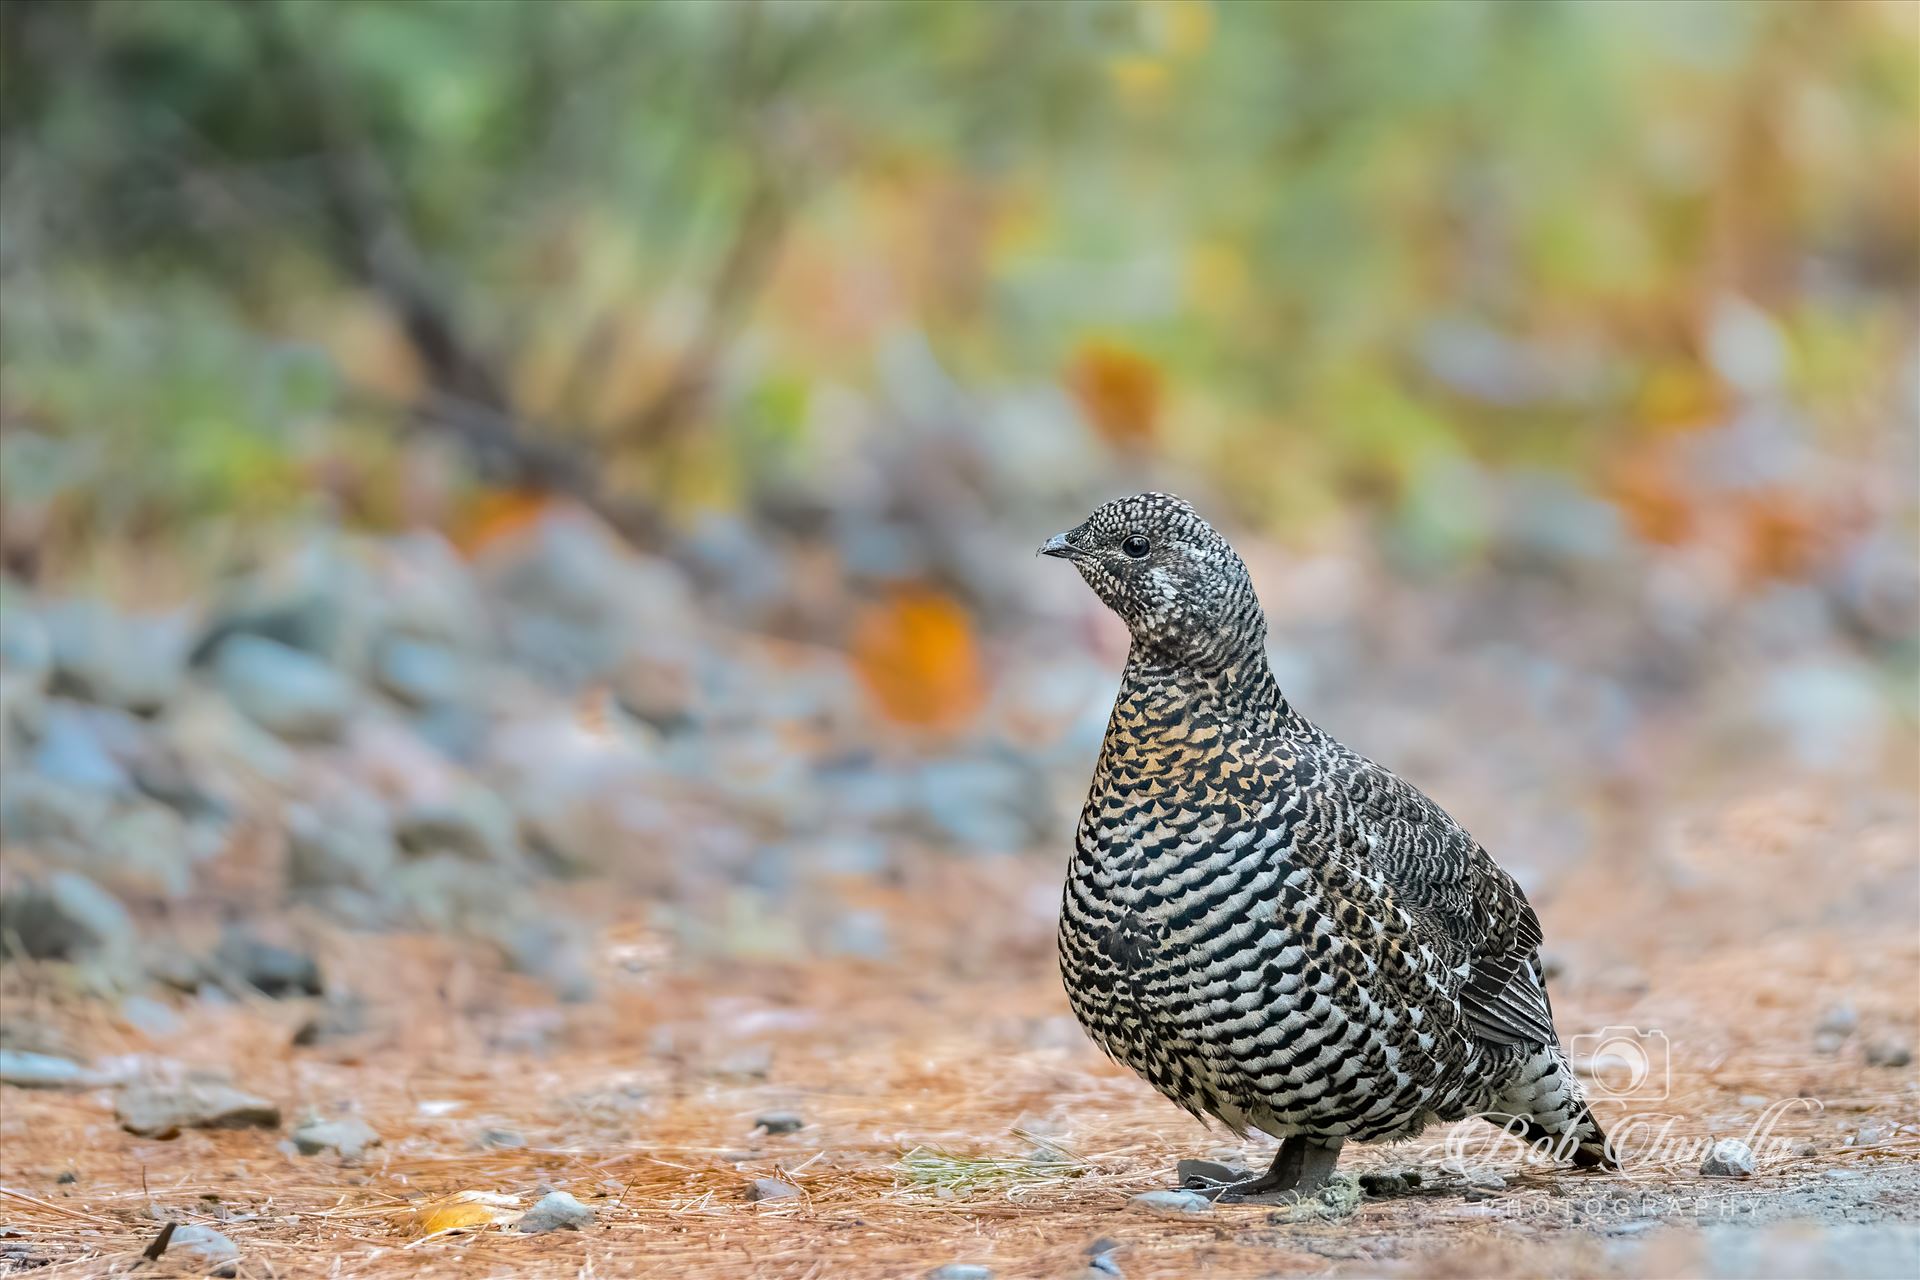 Female Spruce Grouse  by Buckmaster